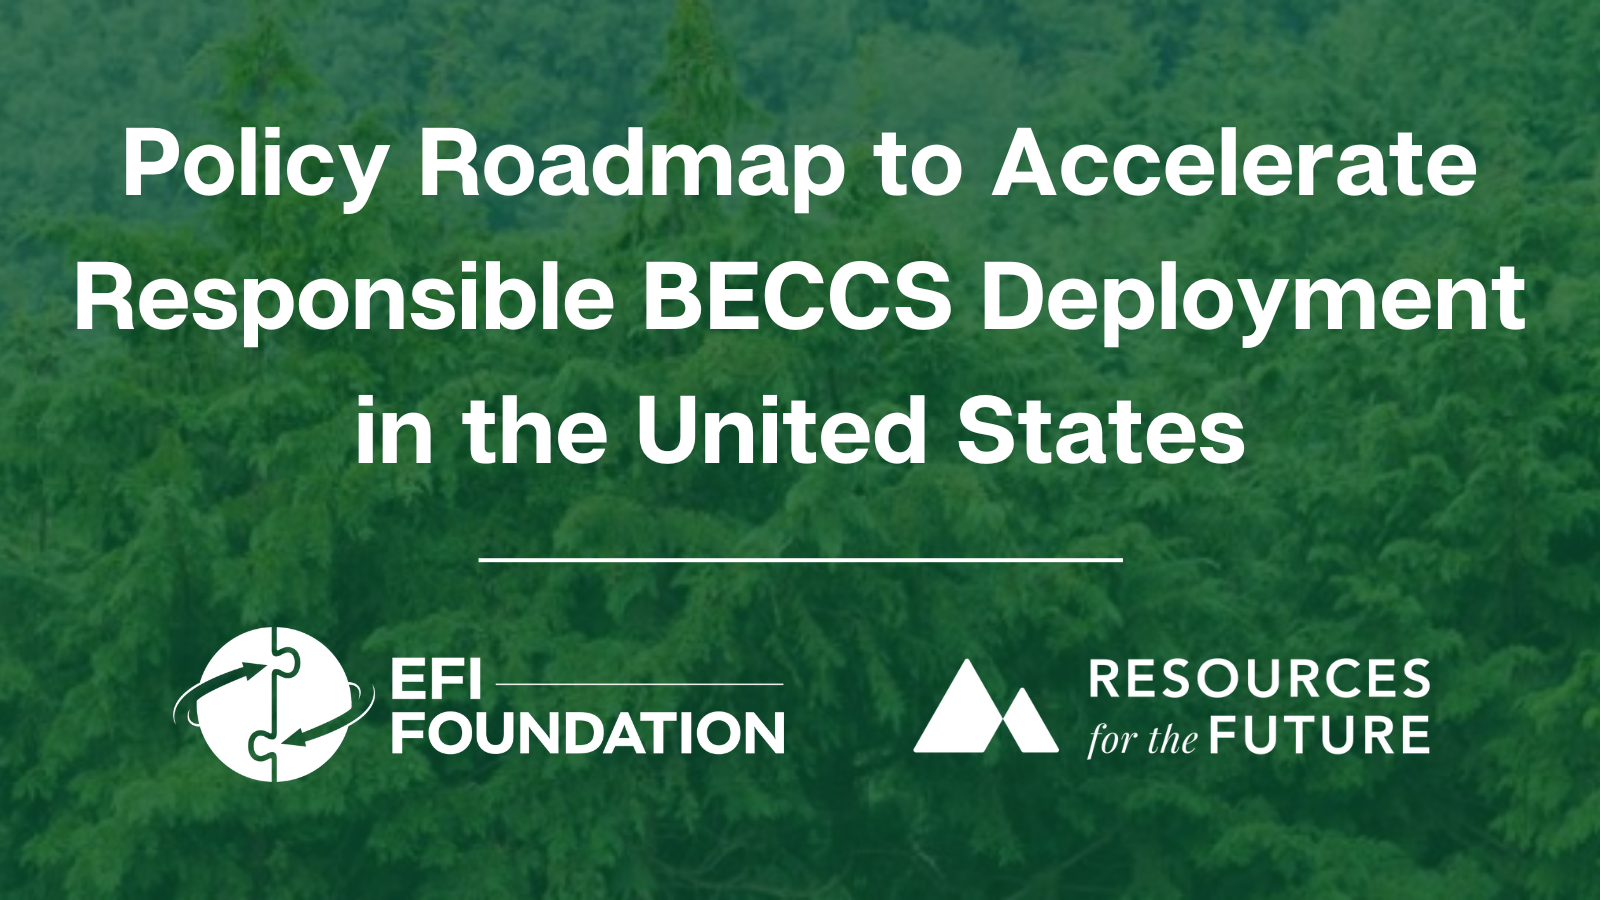 Policy Roadmap to Accerlerate Responsible BECCS Deployment in the United States Illustration